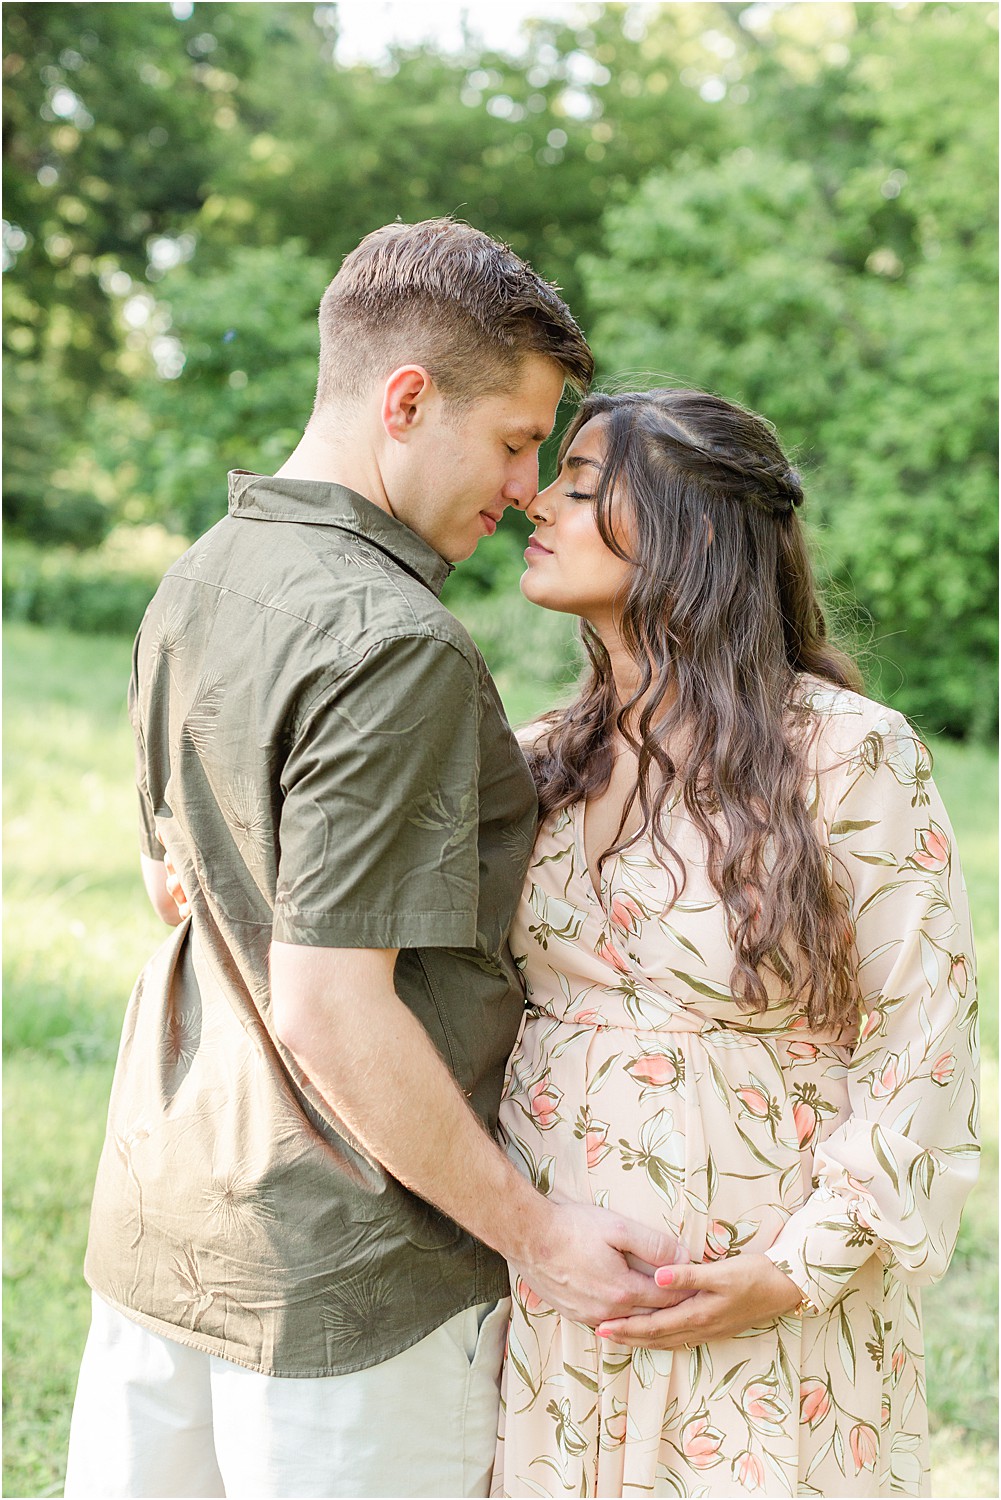 wife looks up at husband during outdoor PA maternity session